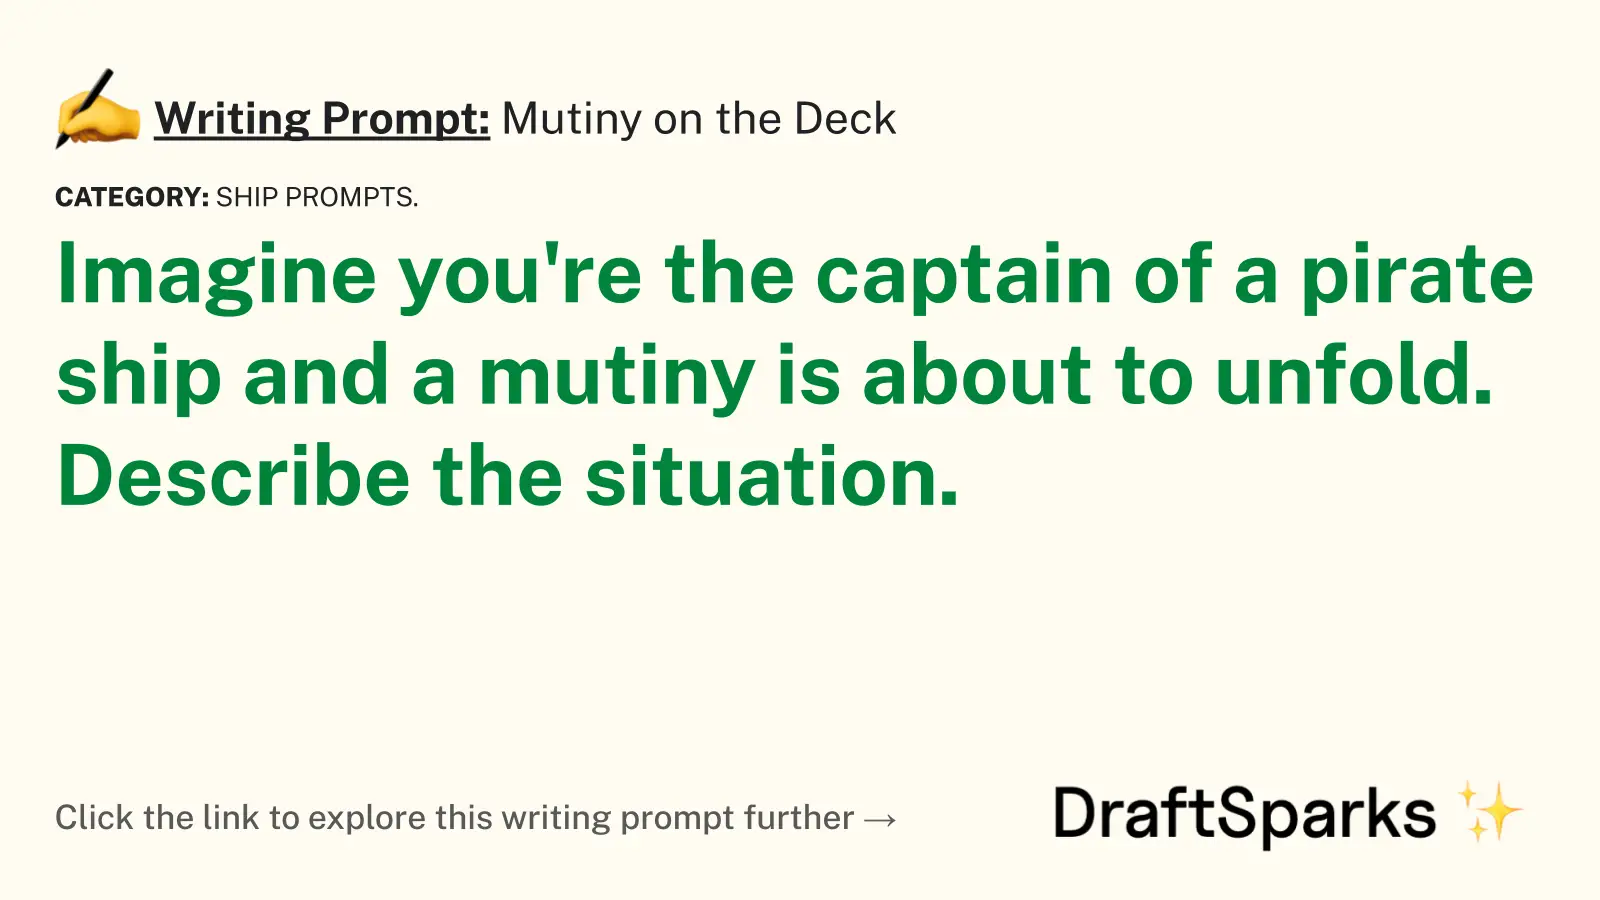 Mutiny on the Deck